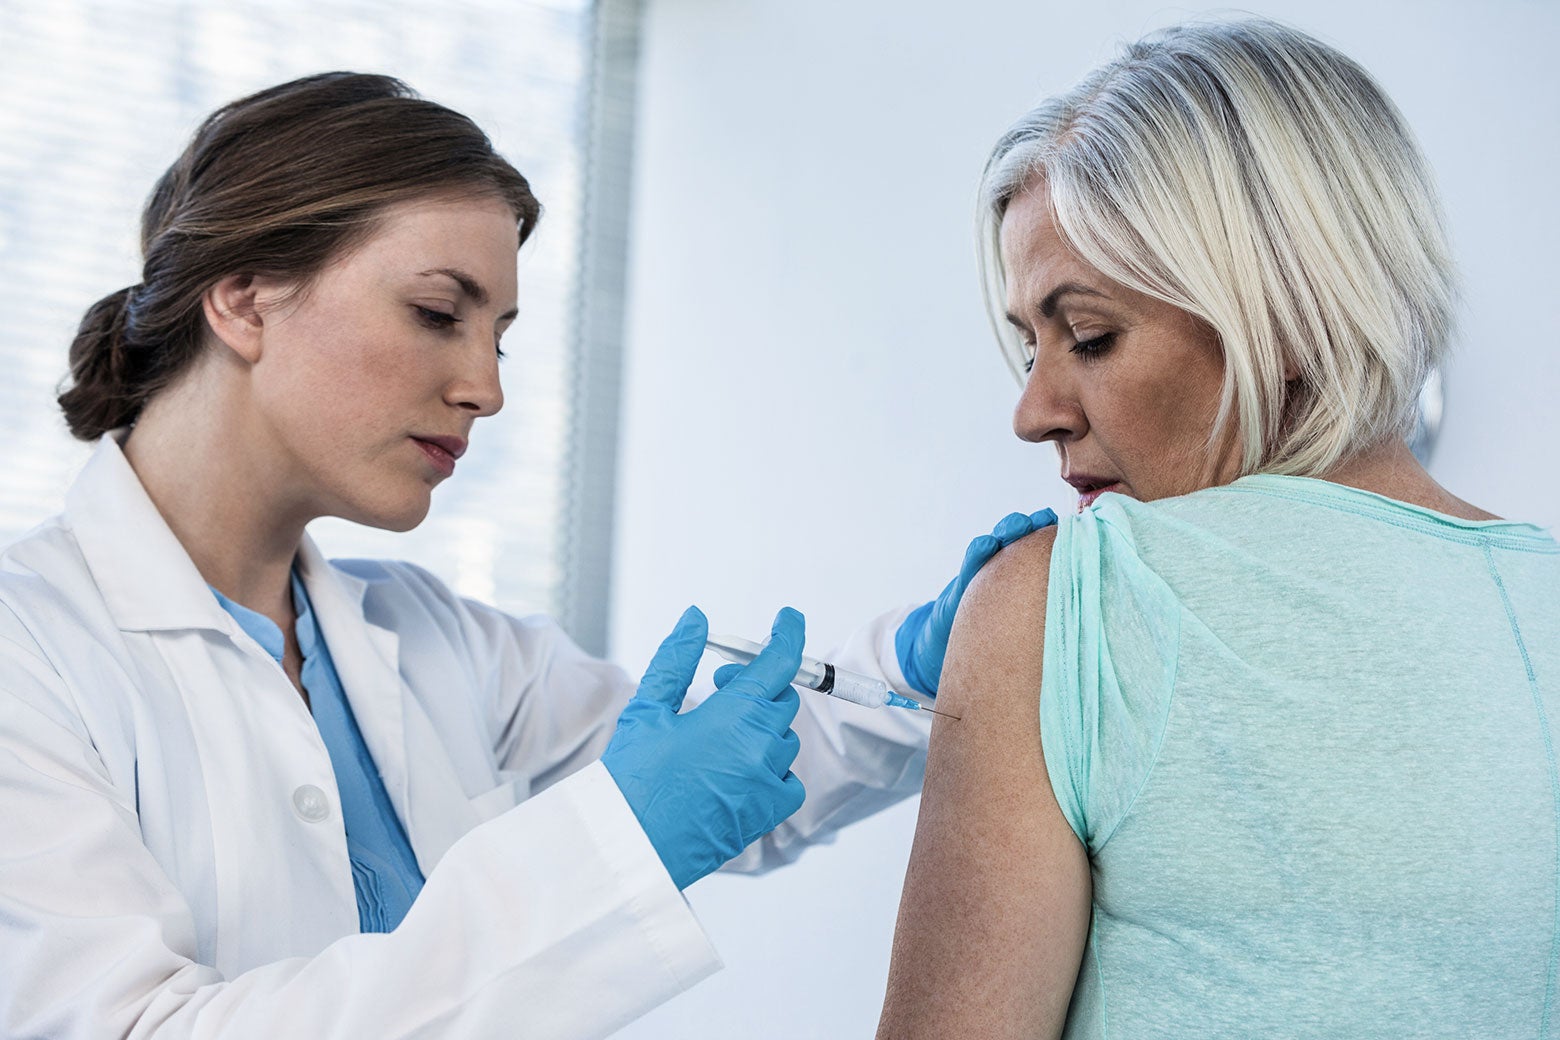 A woman getting a shot from a doctor.